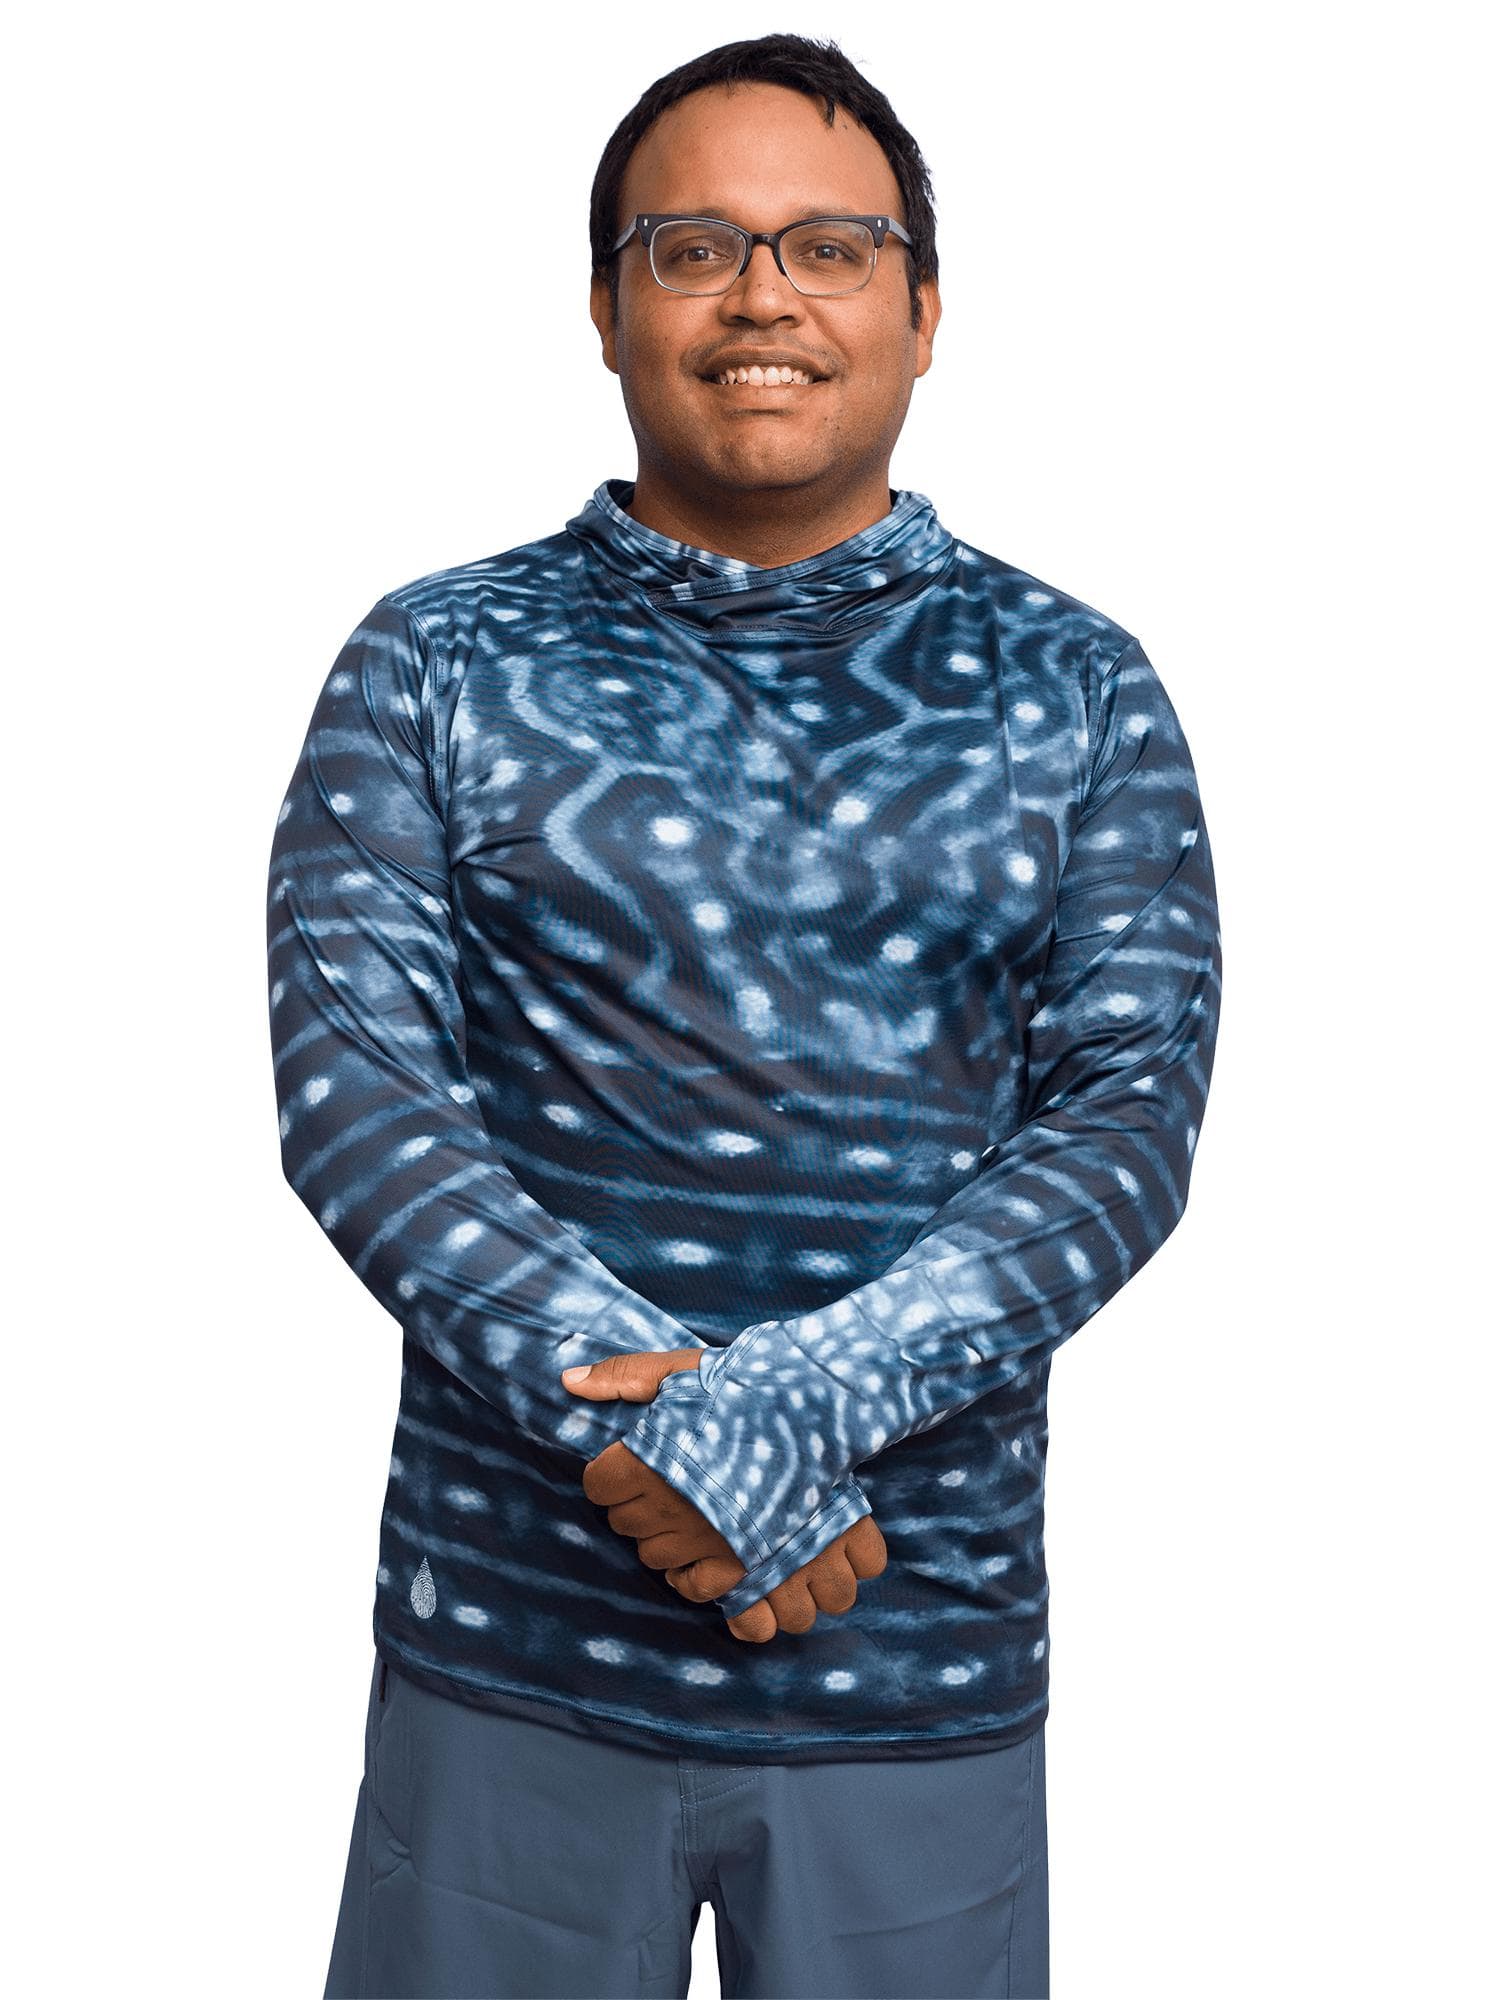 Model: Alberto is a professional sailor and filmmaker promoting youth participation in conservation and water sports. He is 6', 247lbs and wearing a size 2XL shirt and 29 boardshorts. 